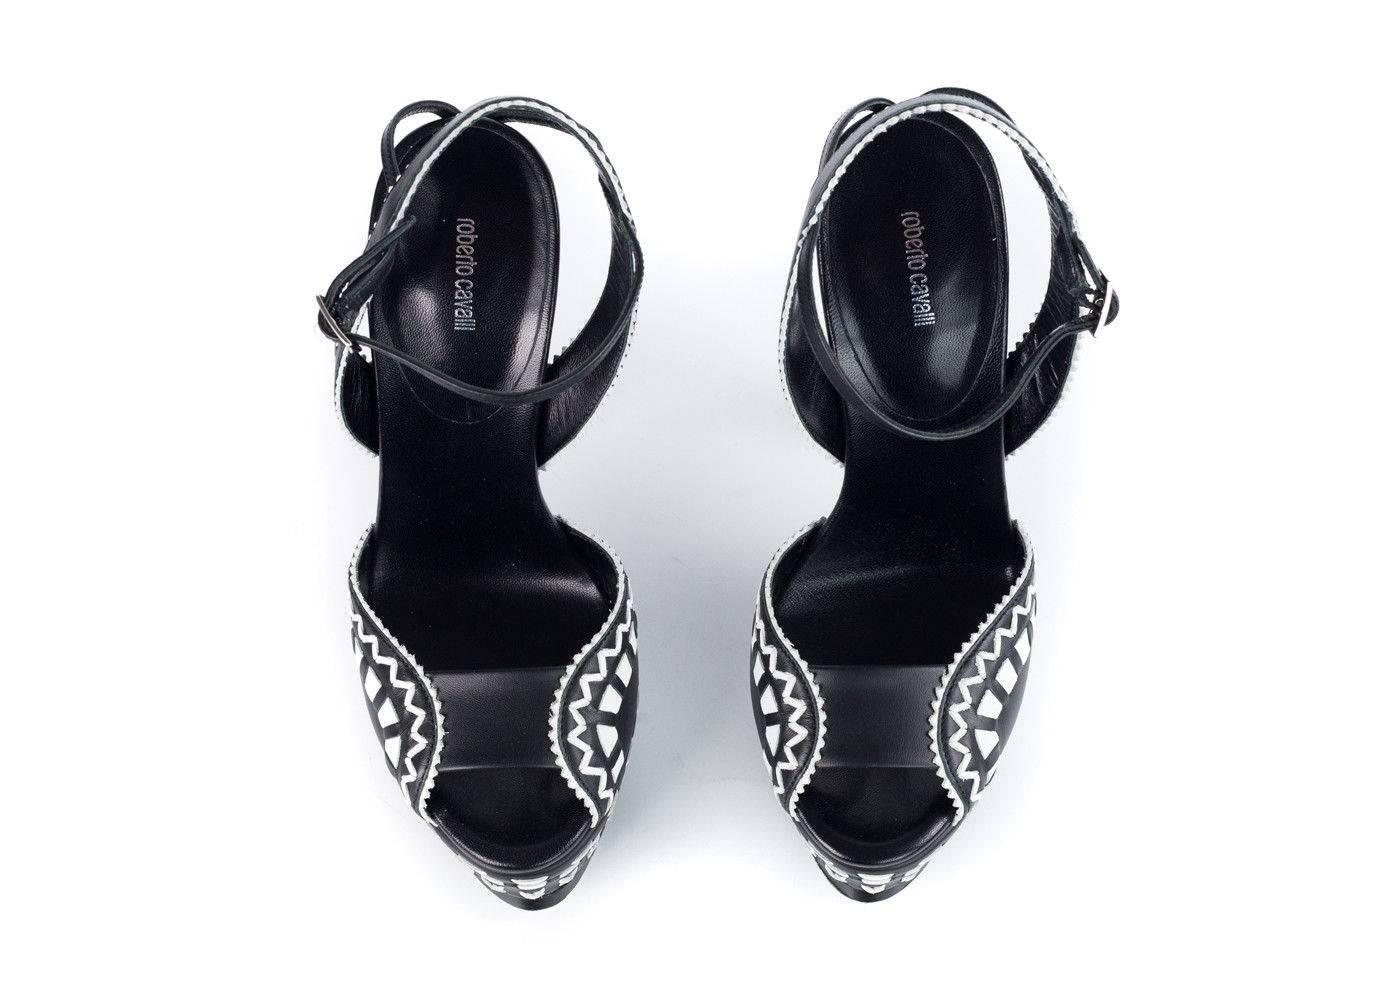 
Black and white textured tribal pattern leather Roberto Cavalli platform sandals with buckle closures at ankles.These are the perfect Pumps for a saturday night out with its high and eye catching hits accents and super high height. Simply wear it